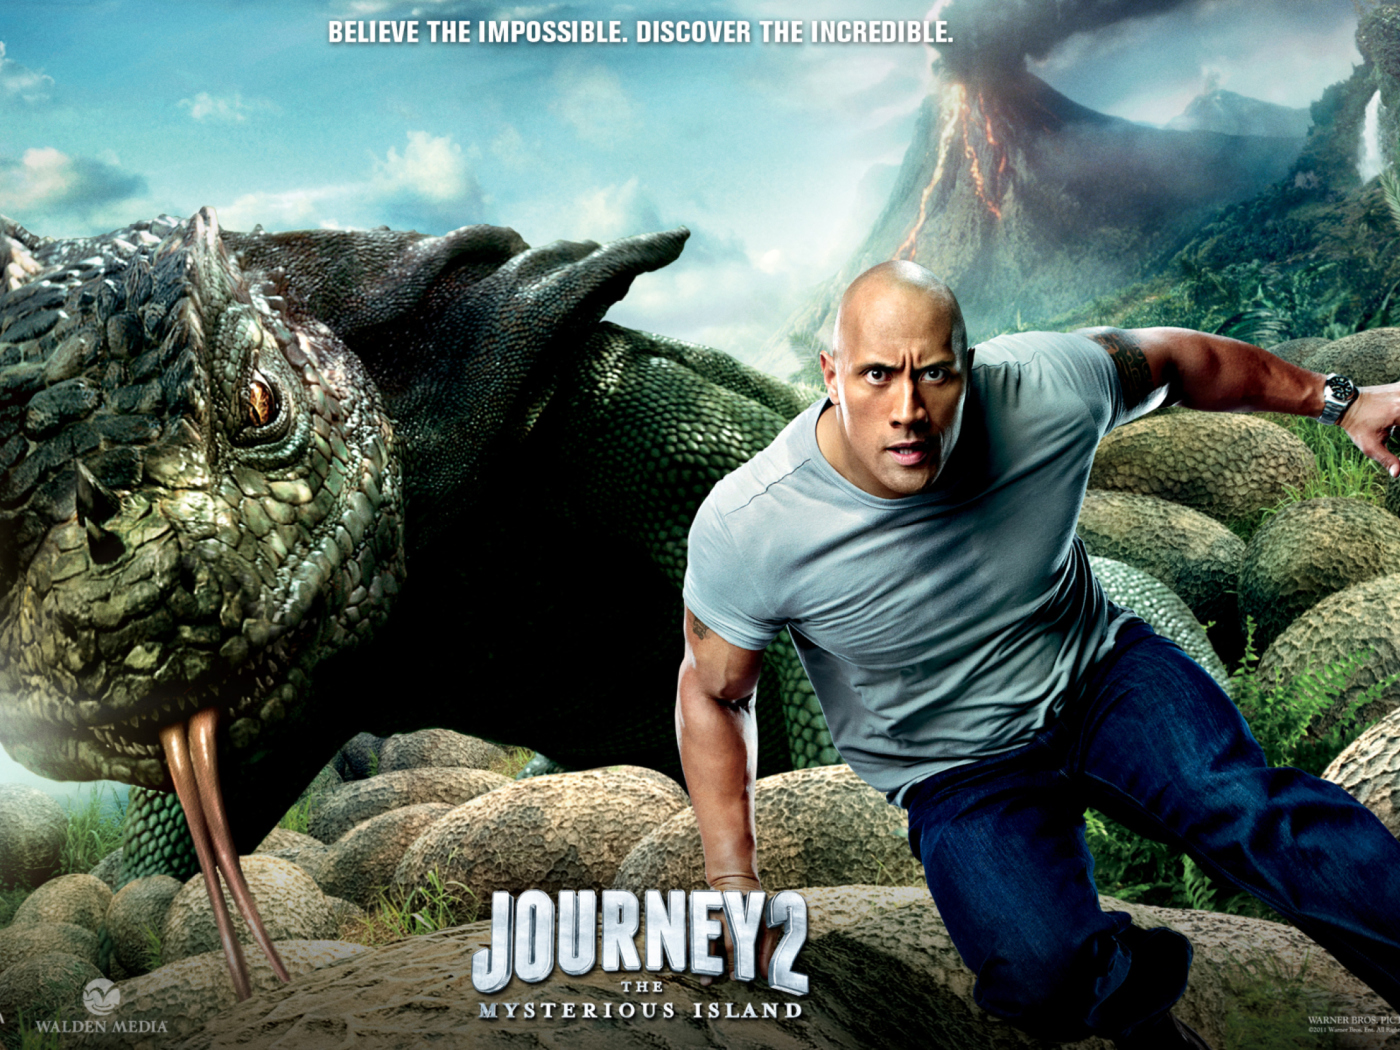 Dwayne Johnson In Journey 2: The Mysterious Island wallpaper 1400x1050